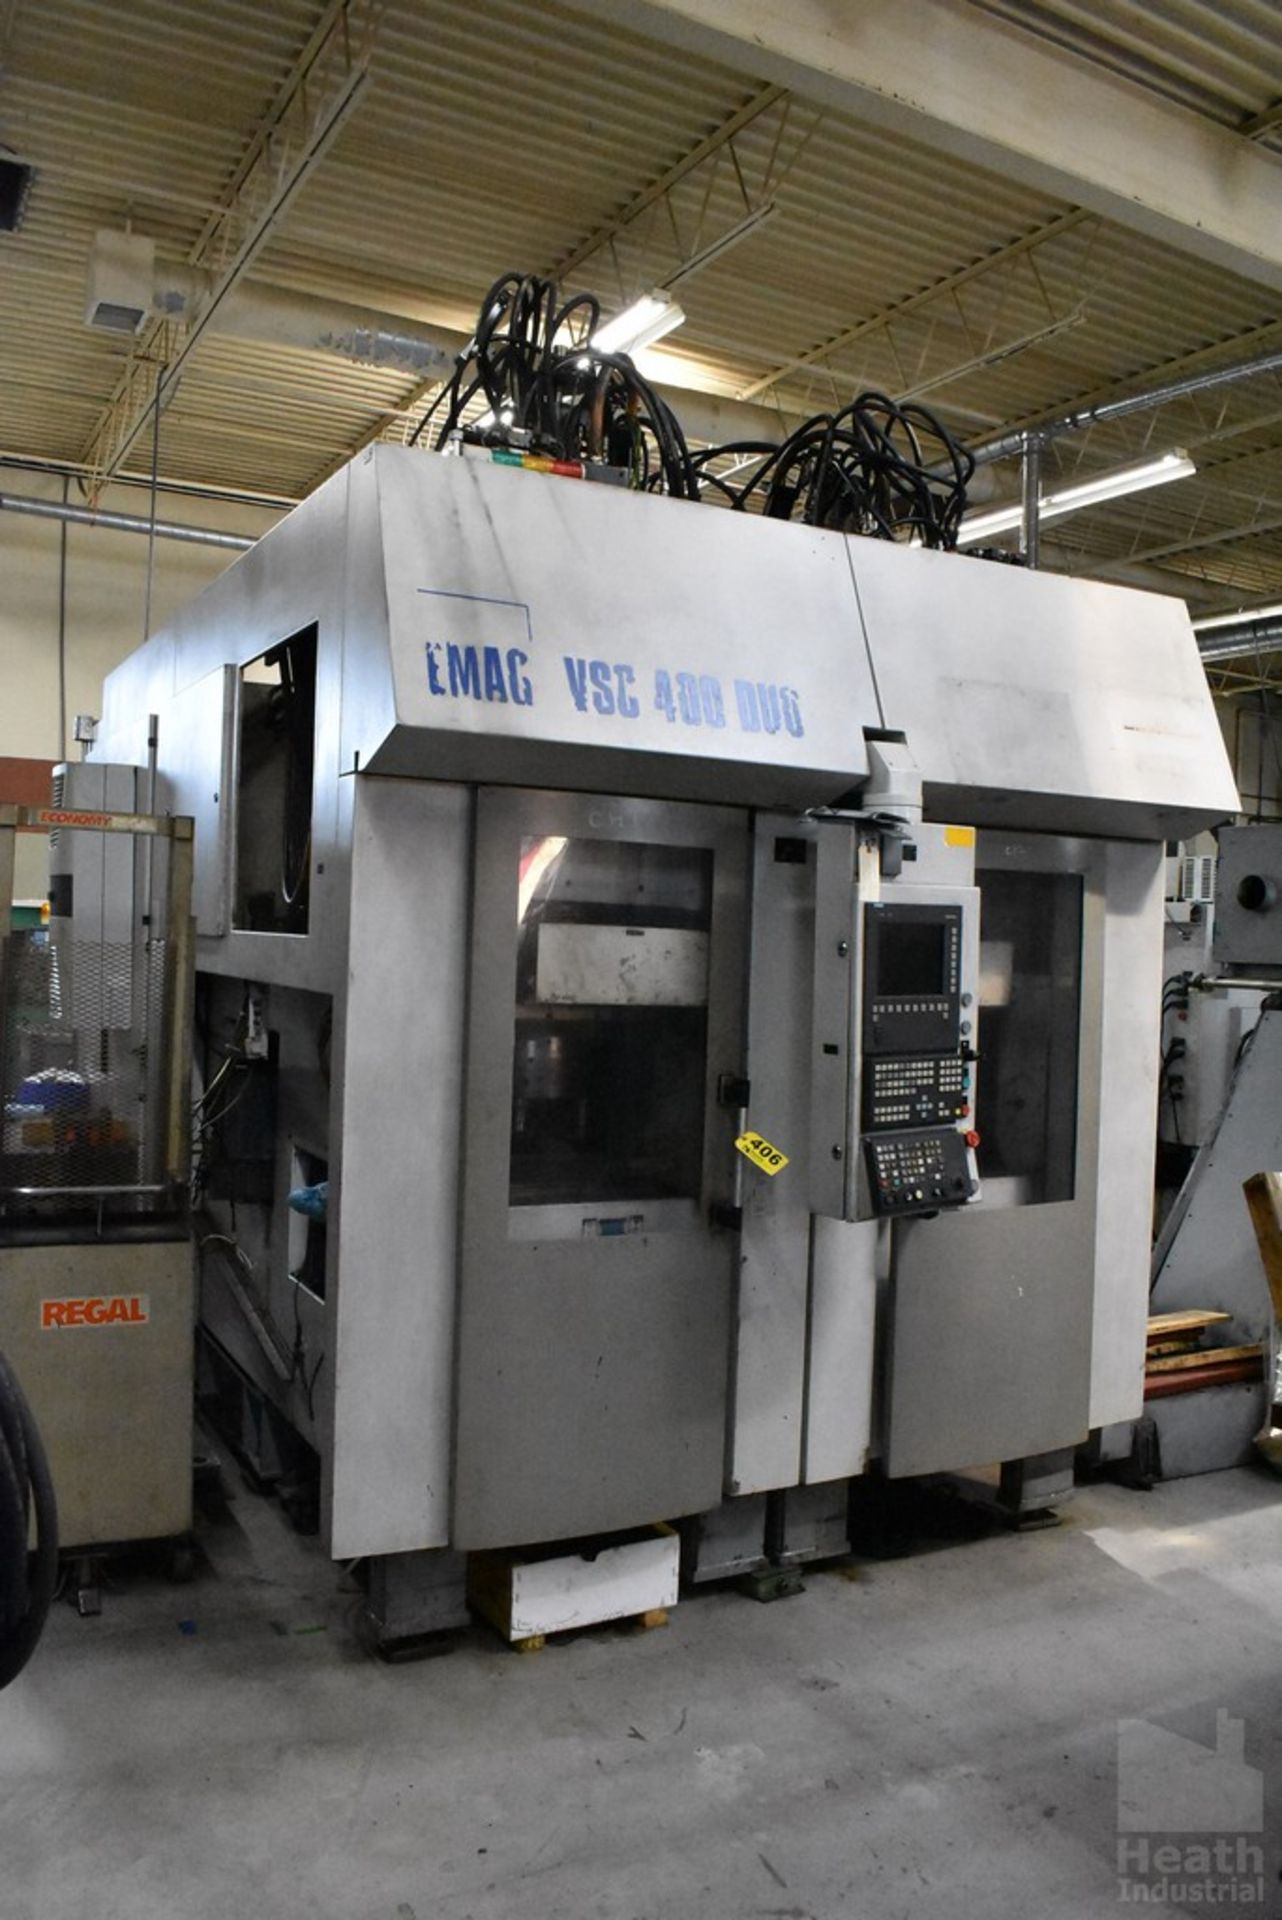 EMAG MODEL VSC400 DUO CNC TWIN SPINDLE VERTICAL PICK-UP TURNING MACHINE, S/N M736-72444 (NEW